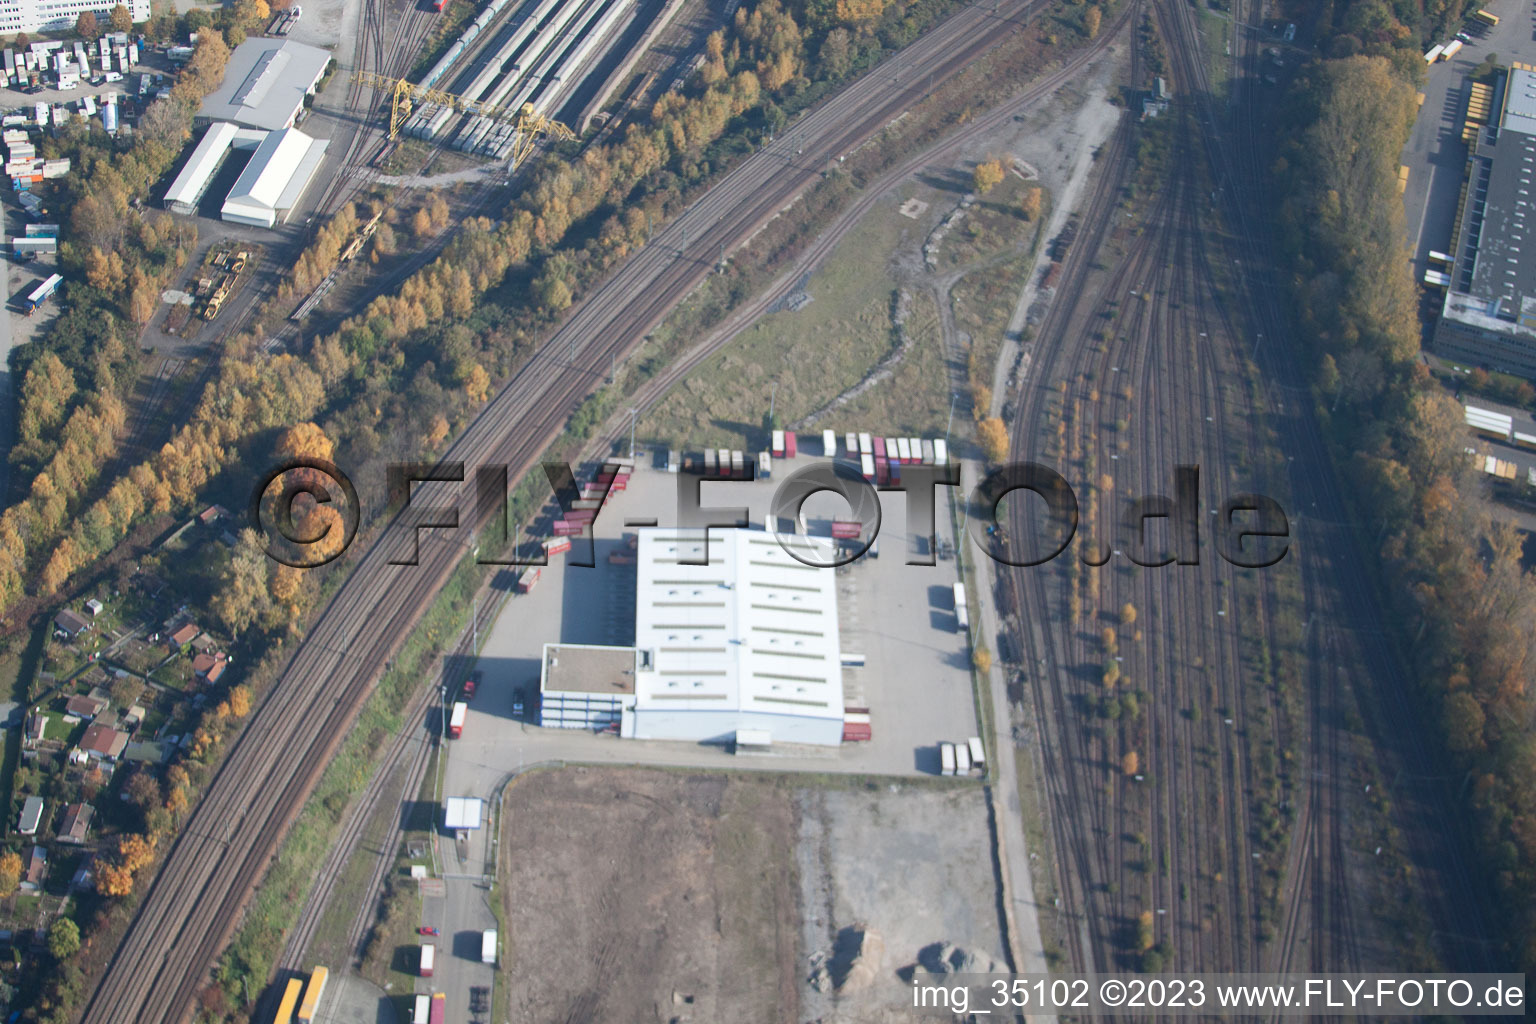 Aerial photograpy of Emon's shipping company in the district Oststadt in Karlsruhe in the state Baden-Wuerttemberg, Germany